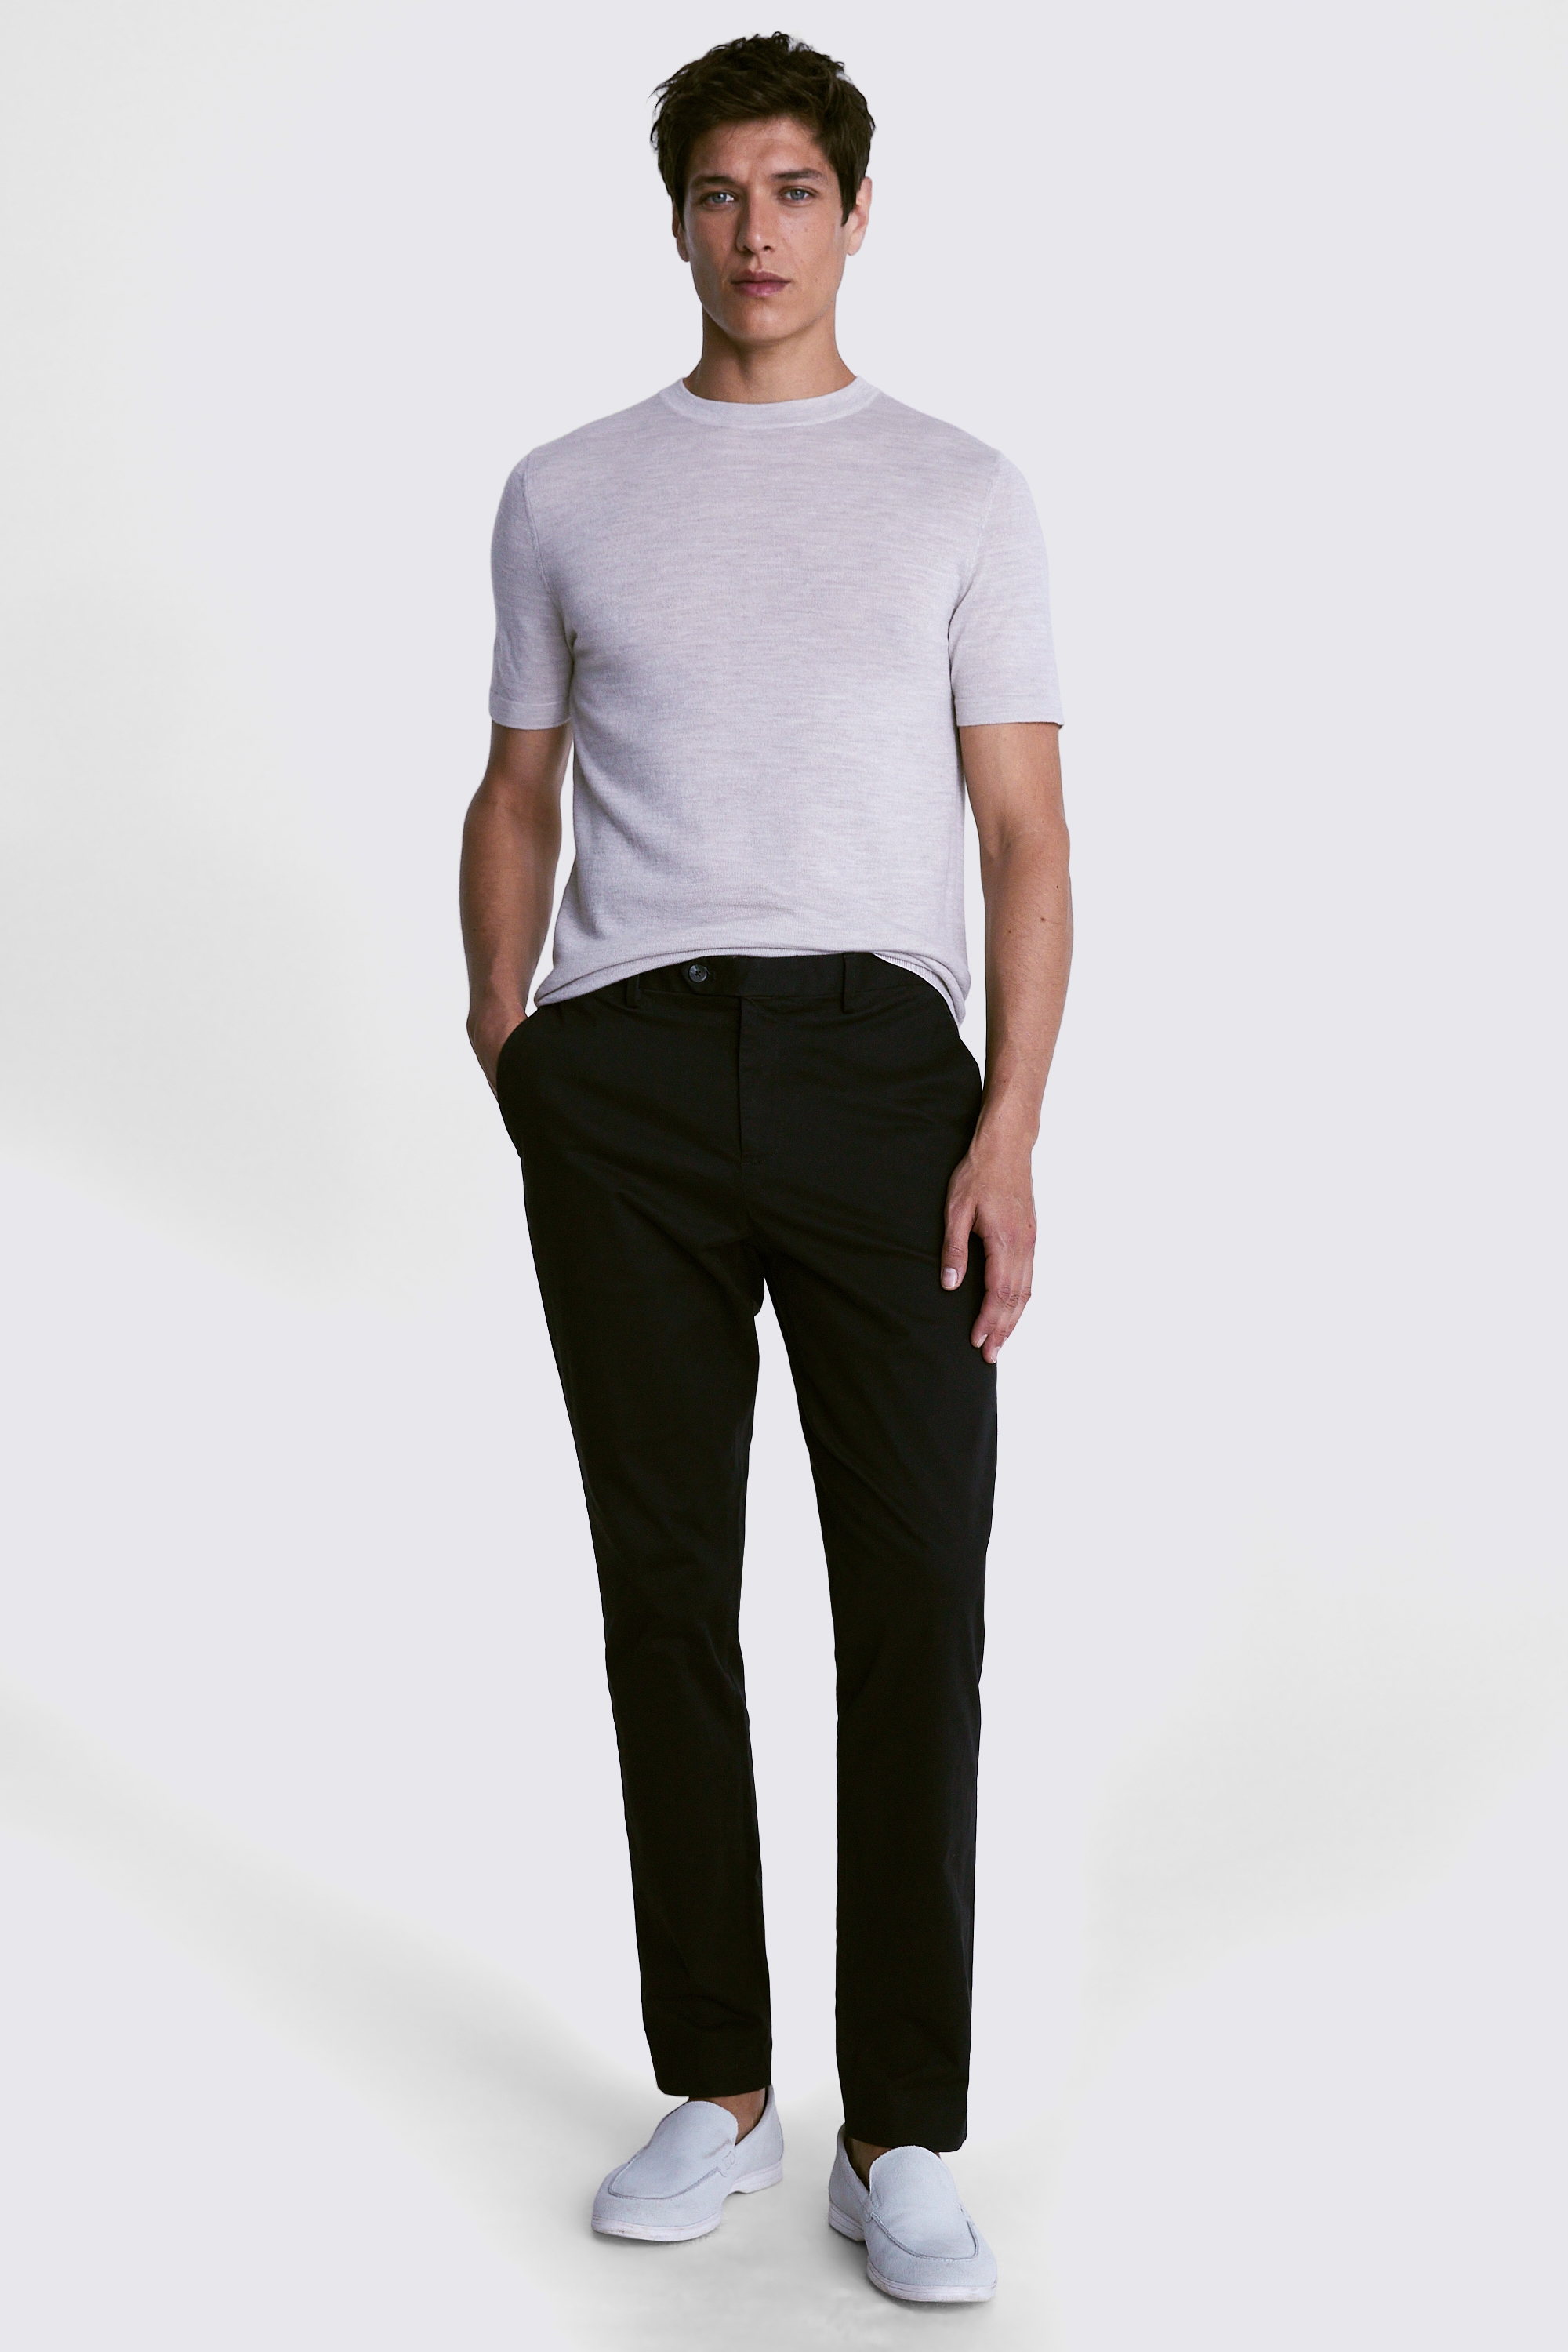 Slim Fit Black Stretch Chinos | Buy Online at Moss